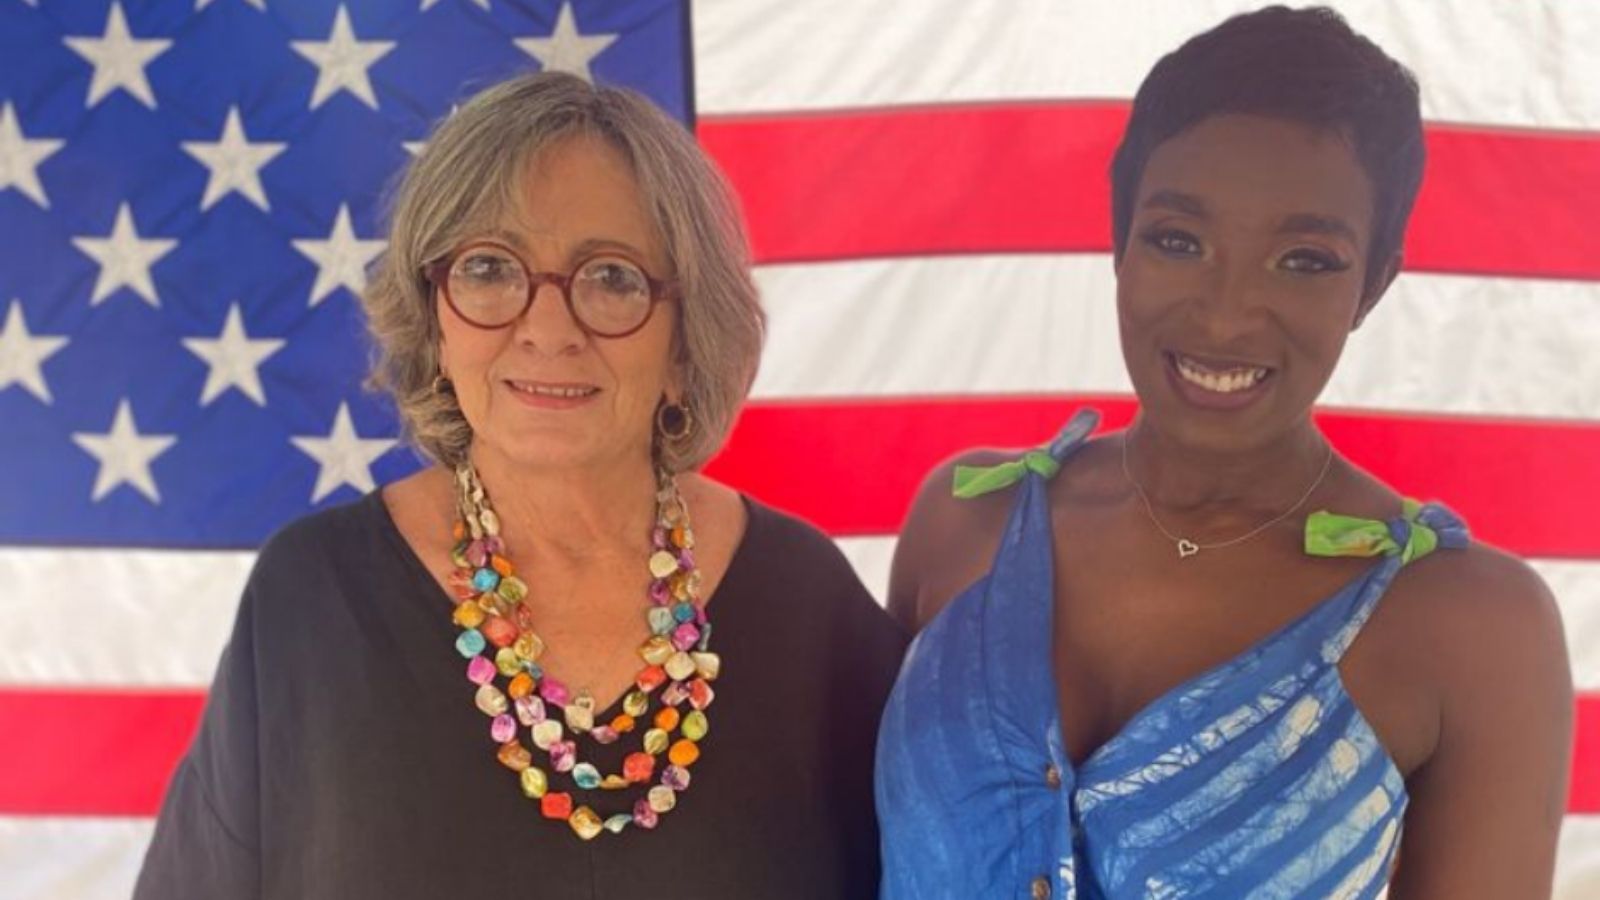 Ambassador to Barbados, the Eastern Caribbean and the OECS Linda Taglialatela and Barbadian singer Nikita pose for a photo before a live concert for Carribean American Heritage Month.